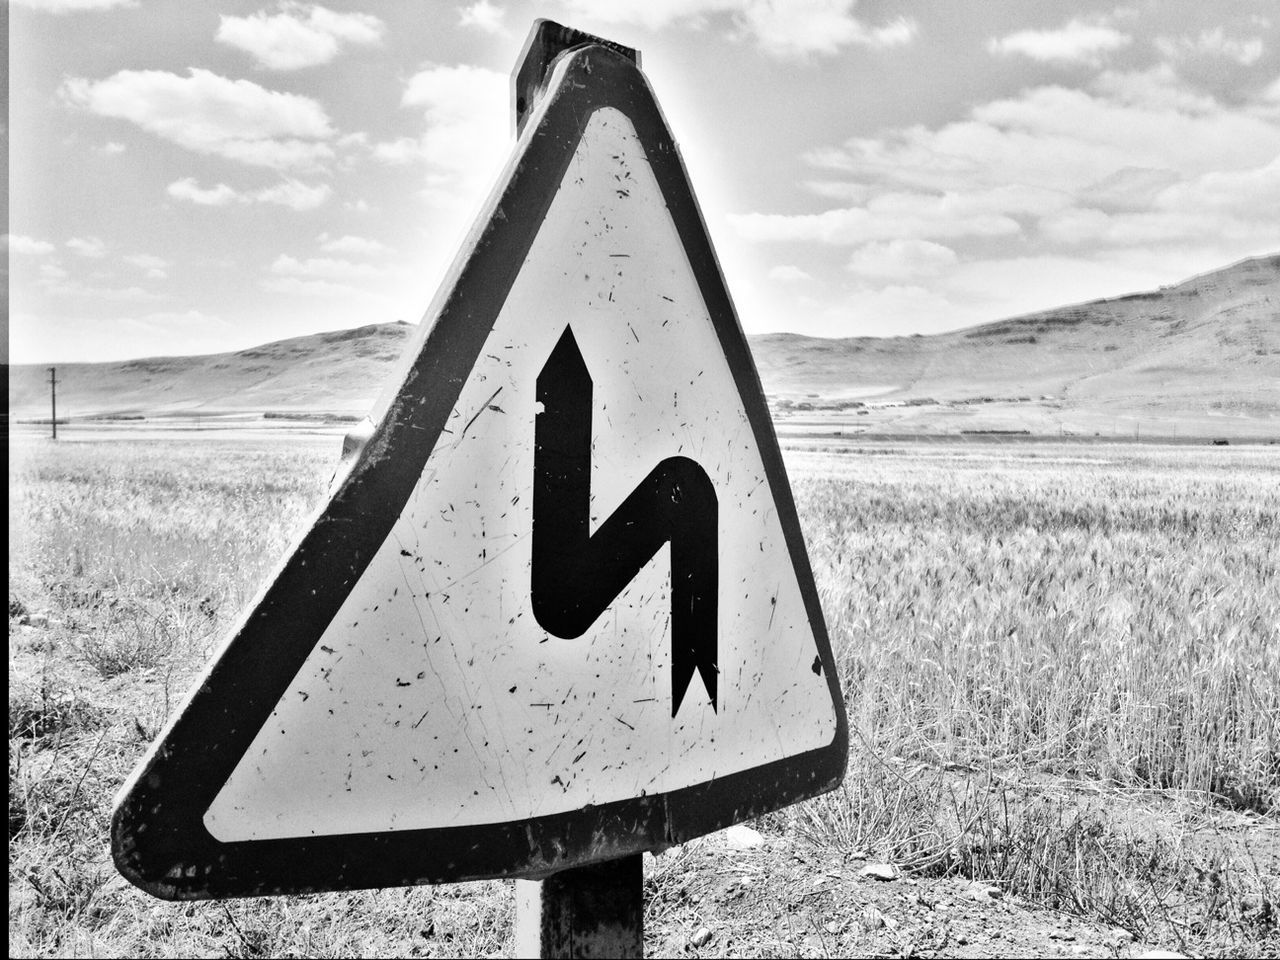 sign, black and white, communication, triangle shape, road, road sign, monochrome photography, sky, warning sign, nature, no people, guidance, cloud, traffic sign, triangle, monochrome, landscape, shape, environment, land, information sign, symbol, day, outdoors, white, signage, transportation